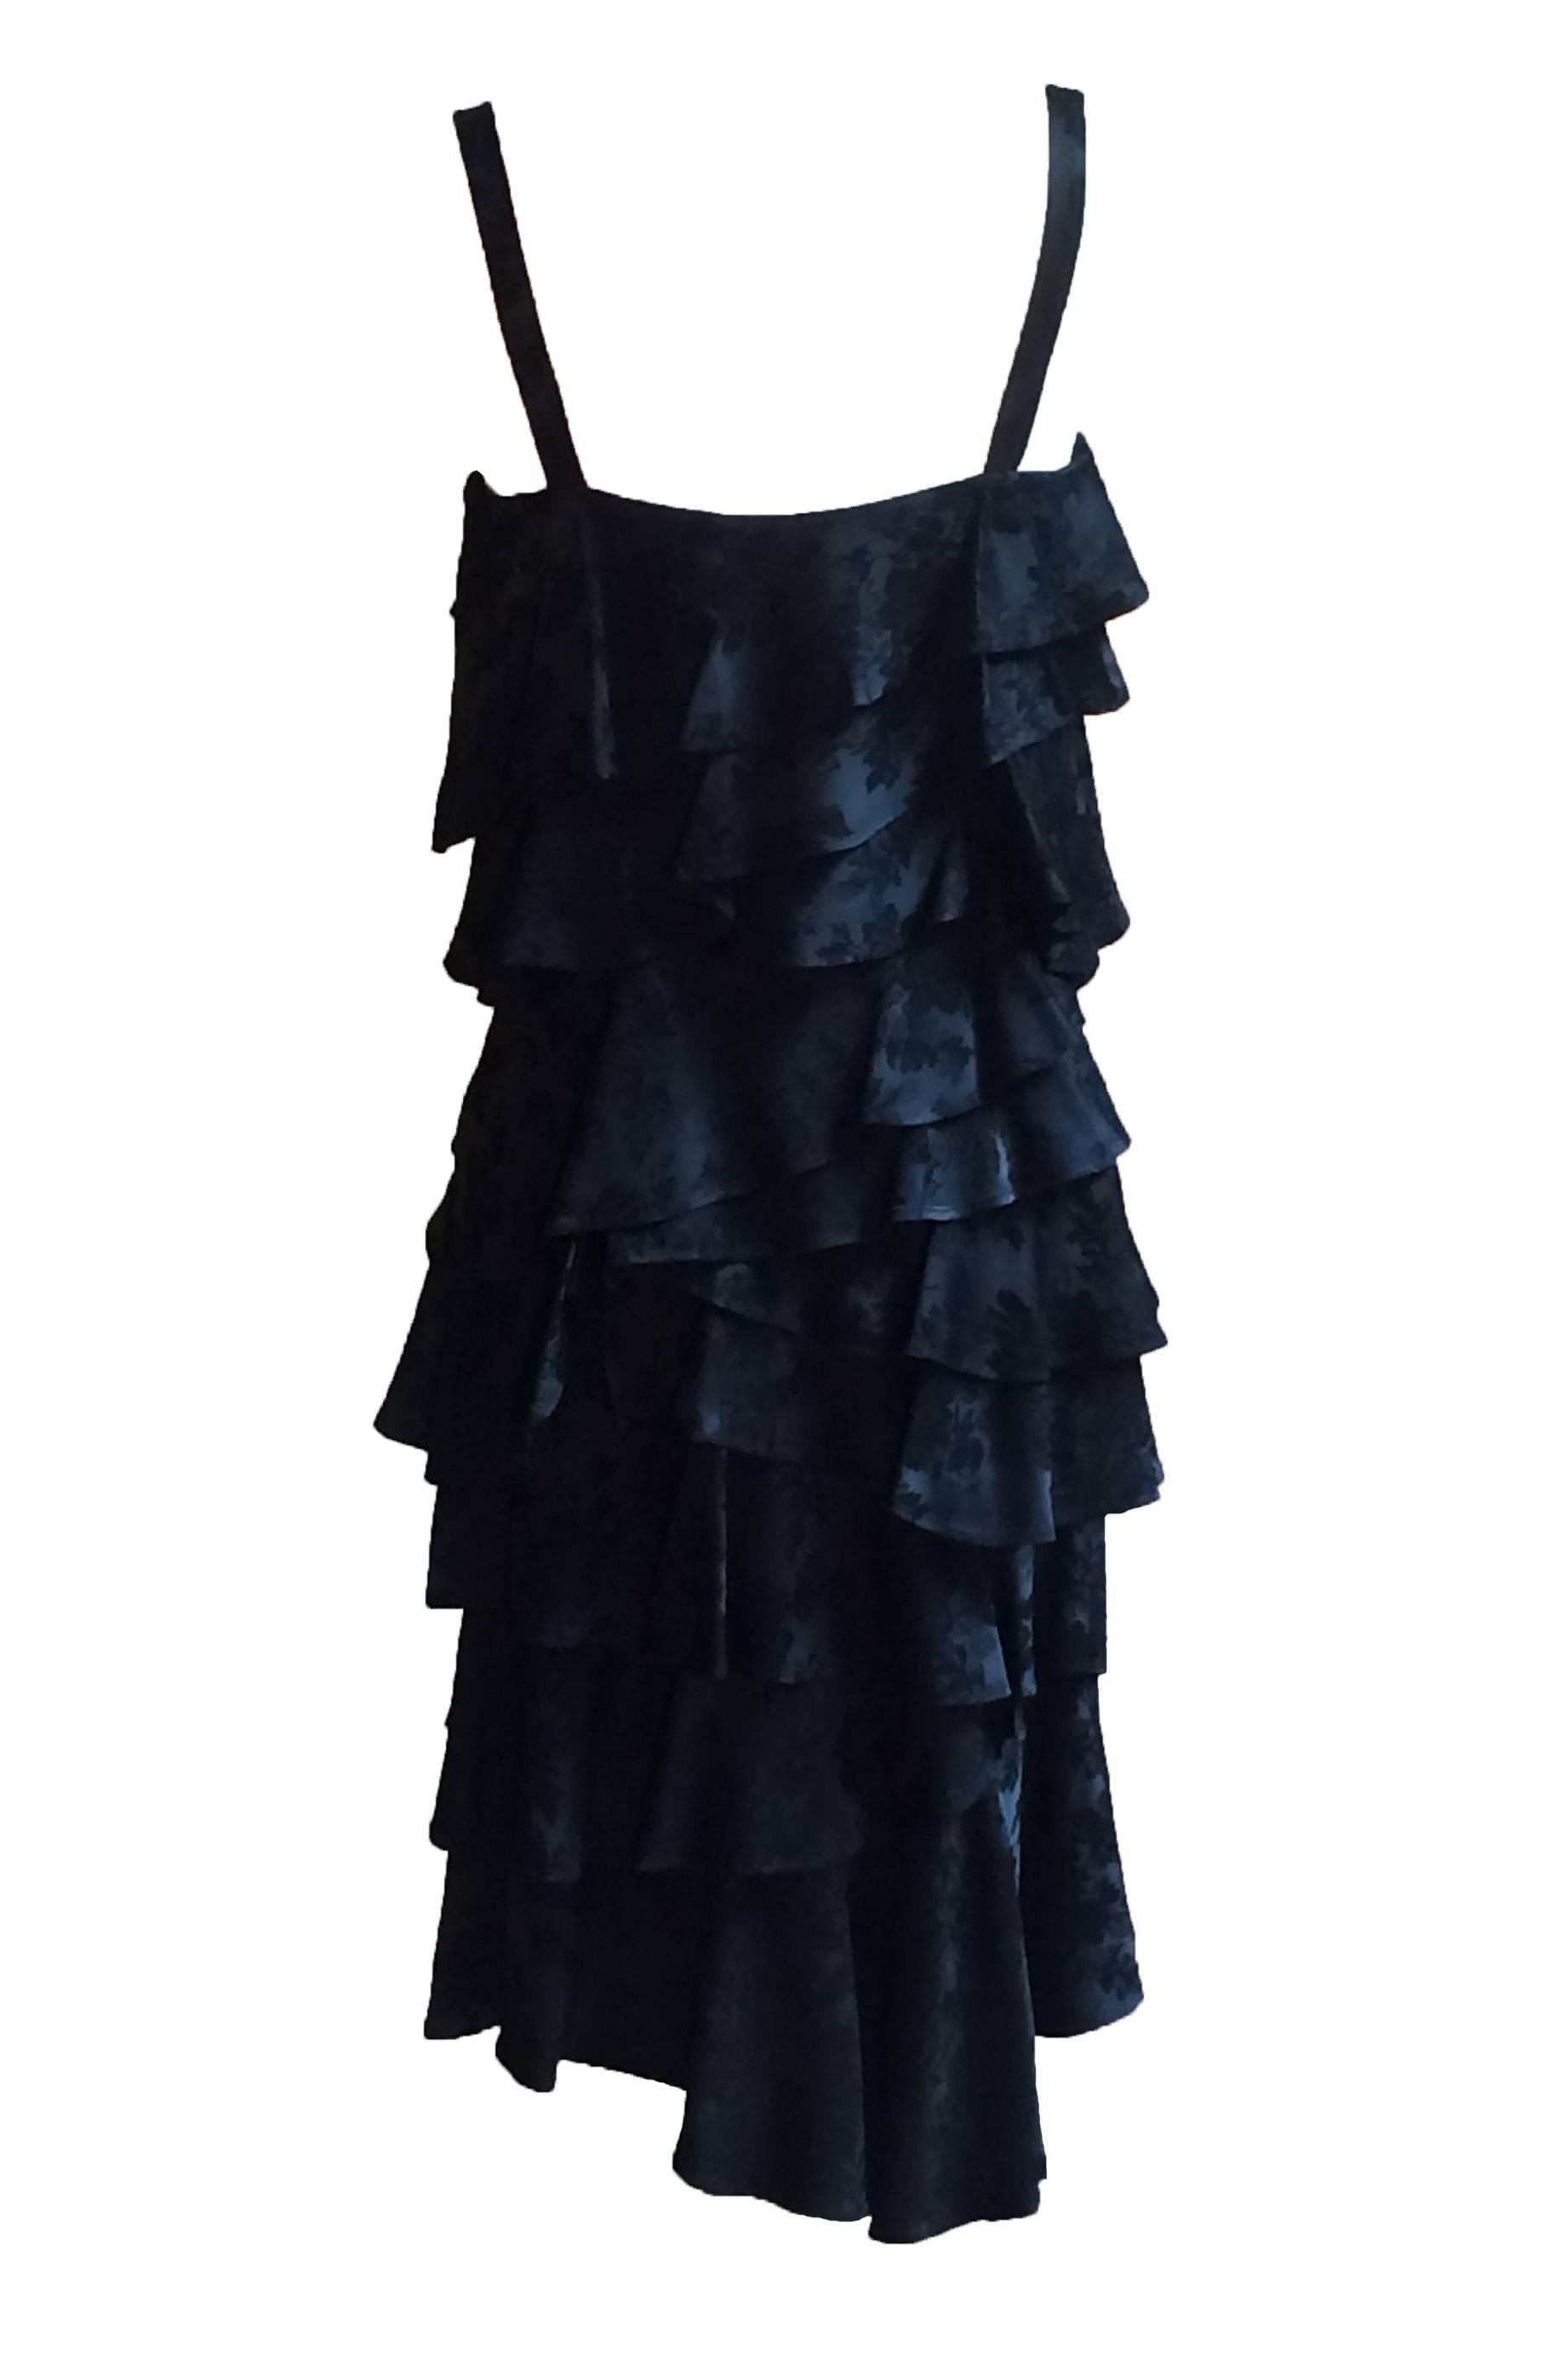 Moschino Couture vintage 1990s black tiered ruffle dress in black floral print. Side zip and hook and eye.

70% acetate, 30% rayon. 

Made in Italy.

Size IT 42, US 8. Fits like modern 2/4. See measurements.
Bust 31